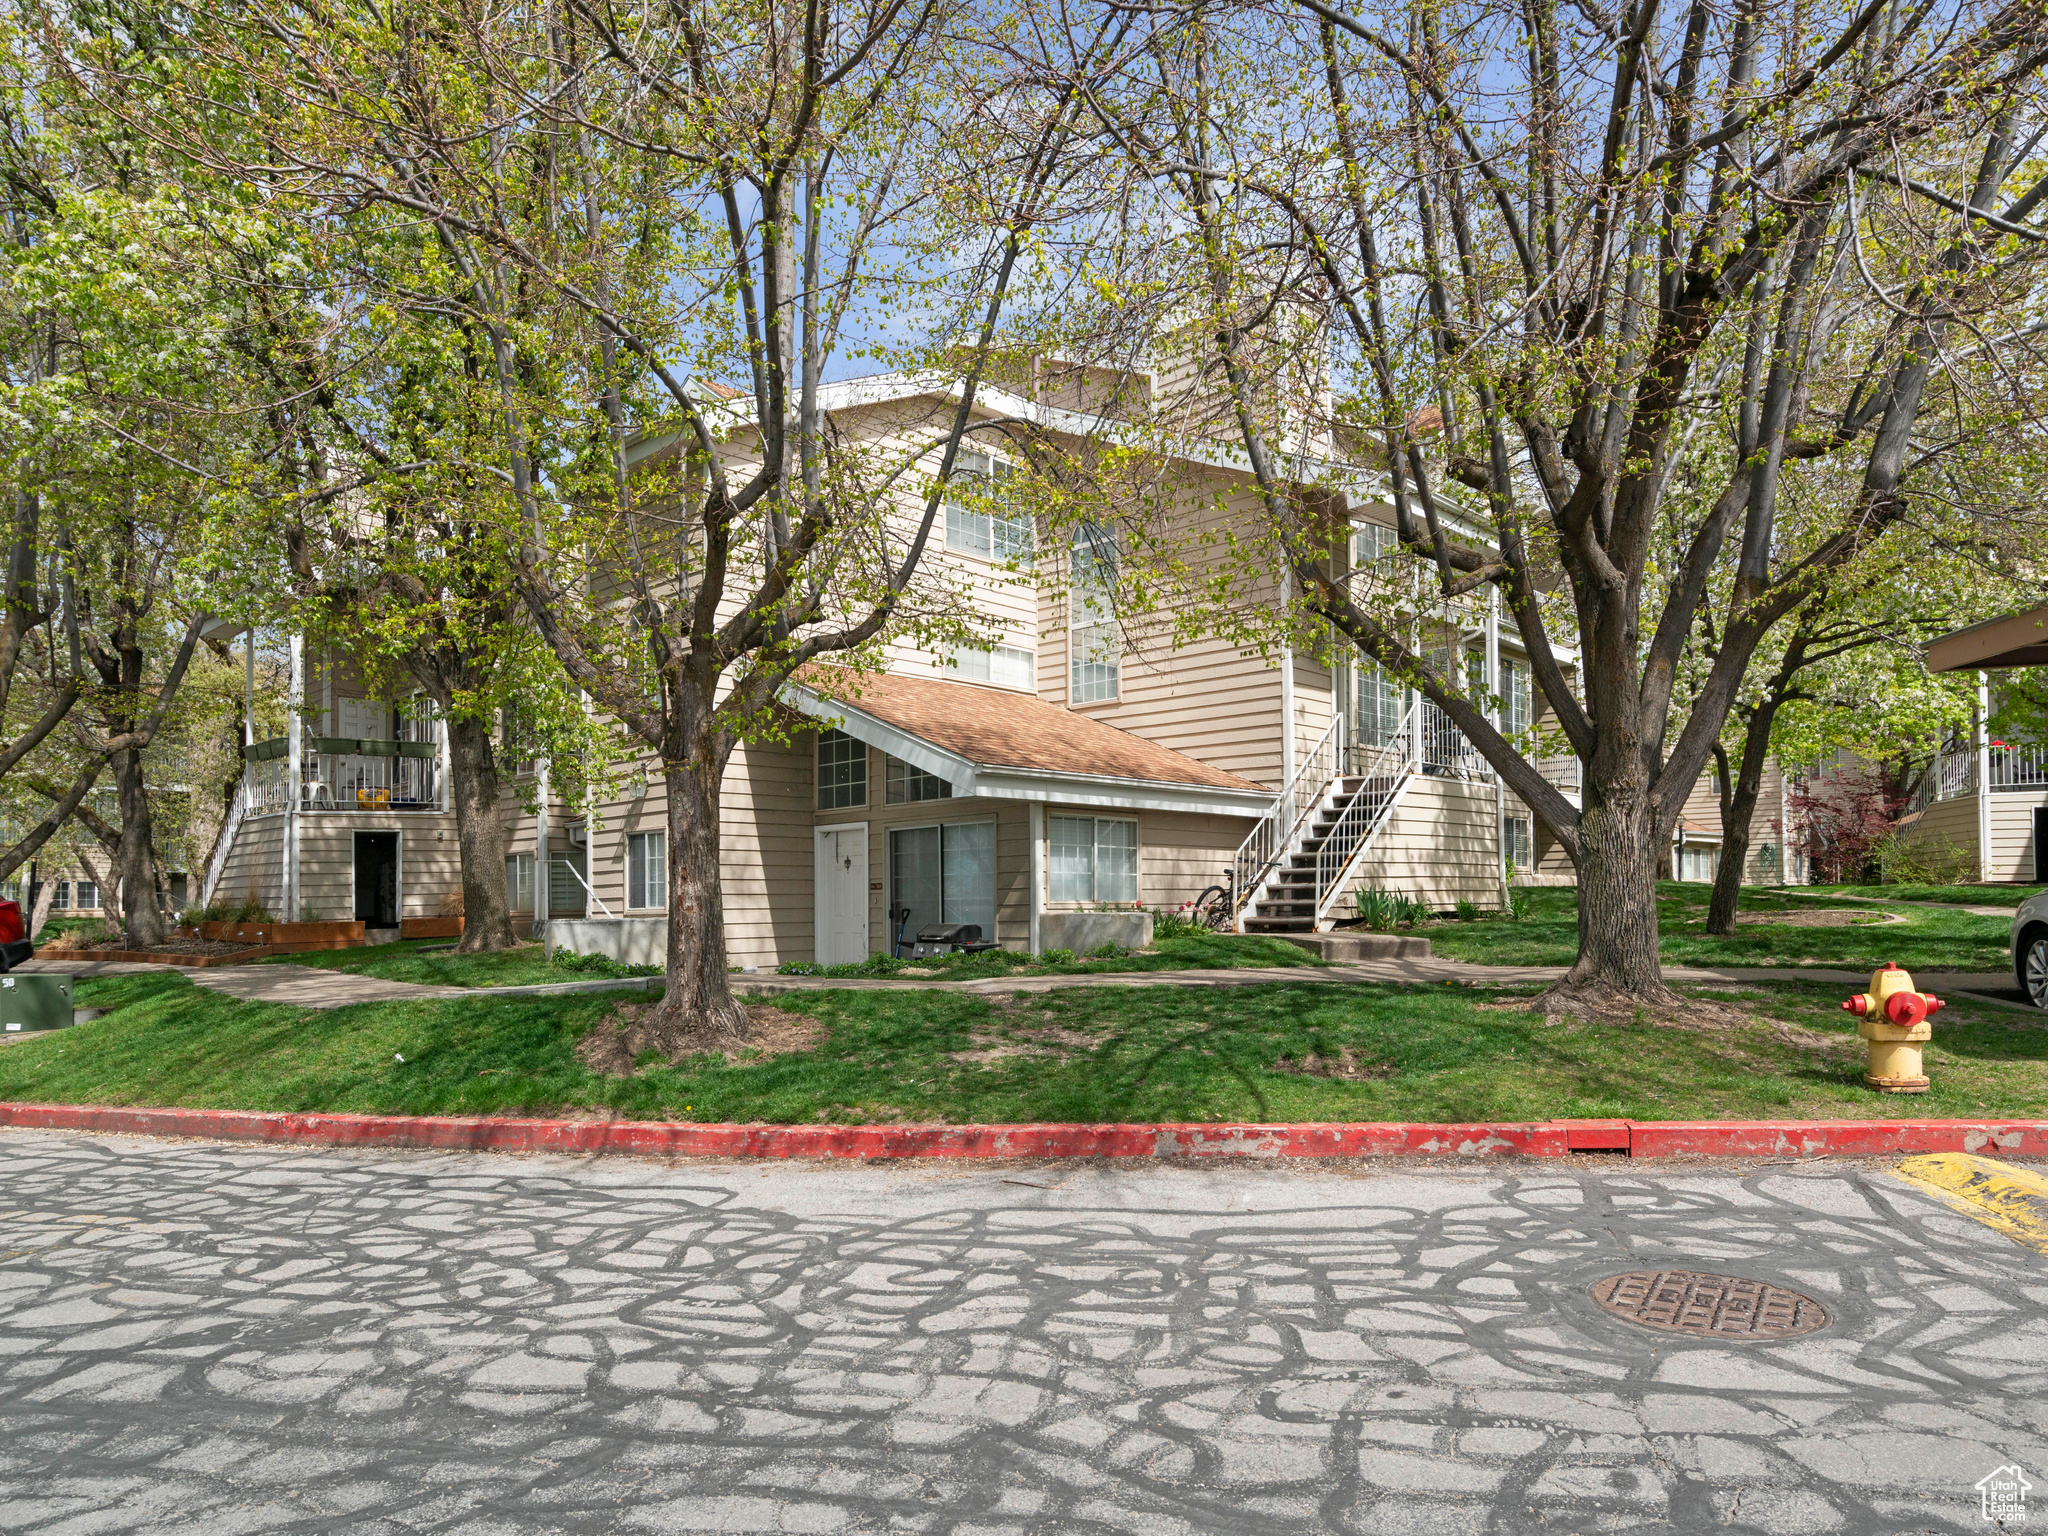 650 S MAIN E #7201, Bountiful, Utah 84010, 2 Bedrooms Bedrooms, 7 Rooms Rooms,1 BathroomBathrooms,Residential,For sale,MAIN,1994703